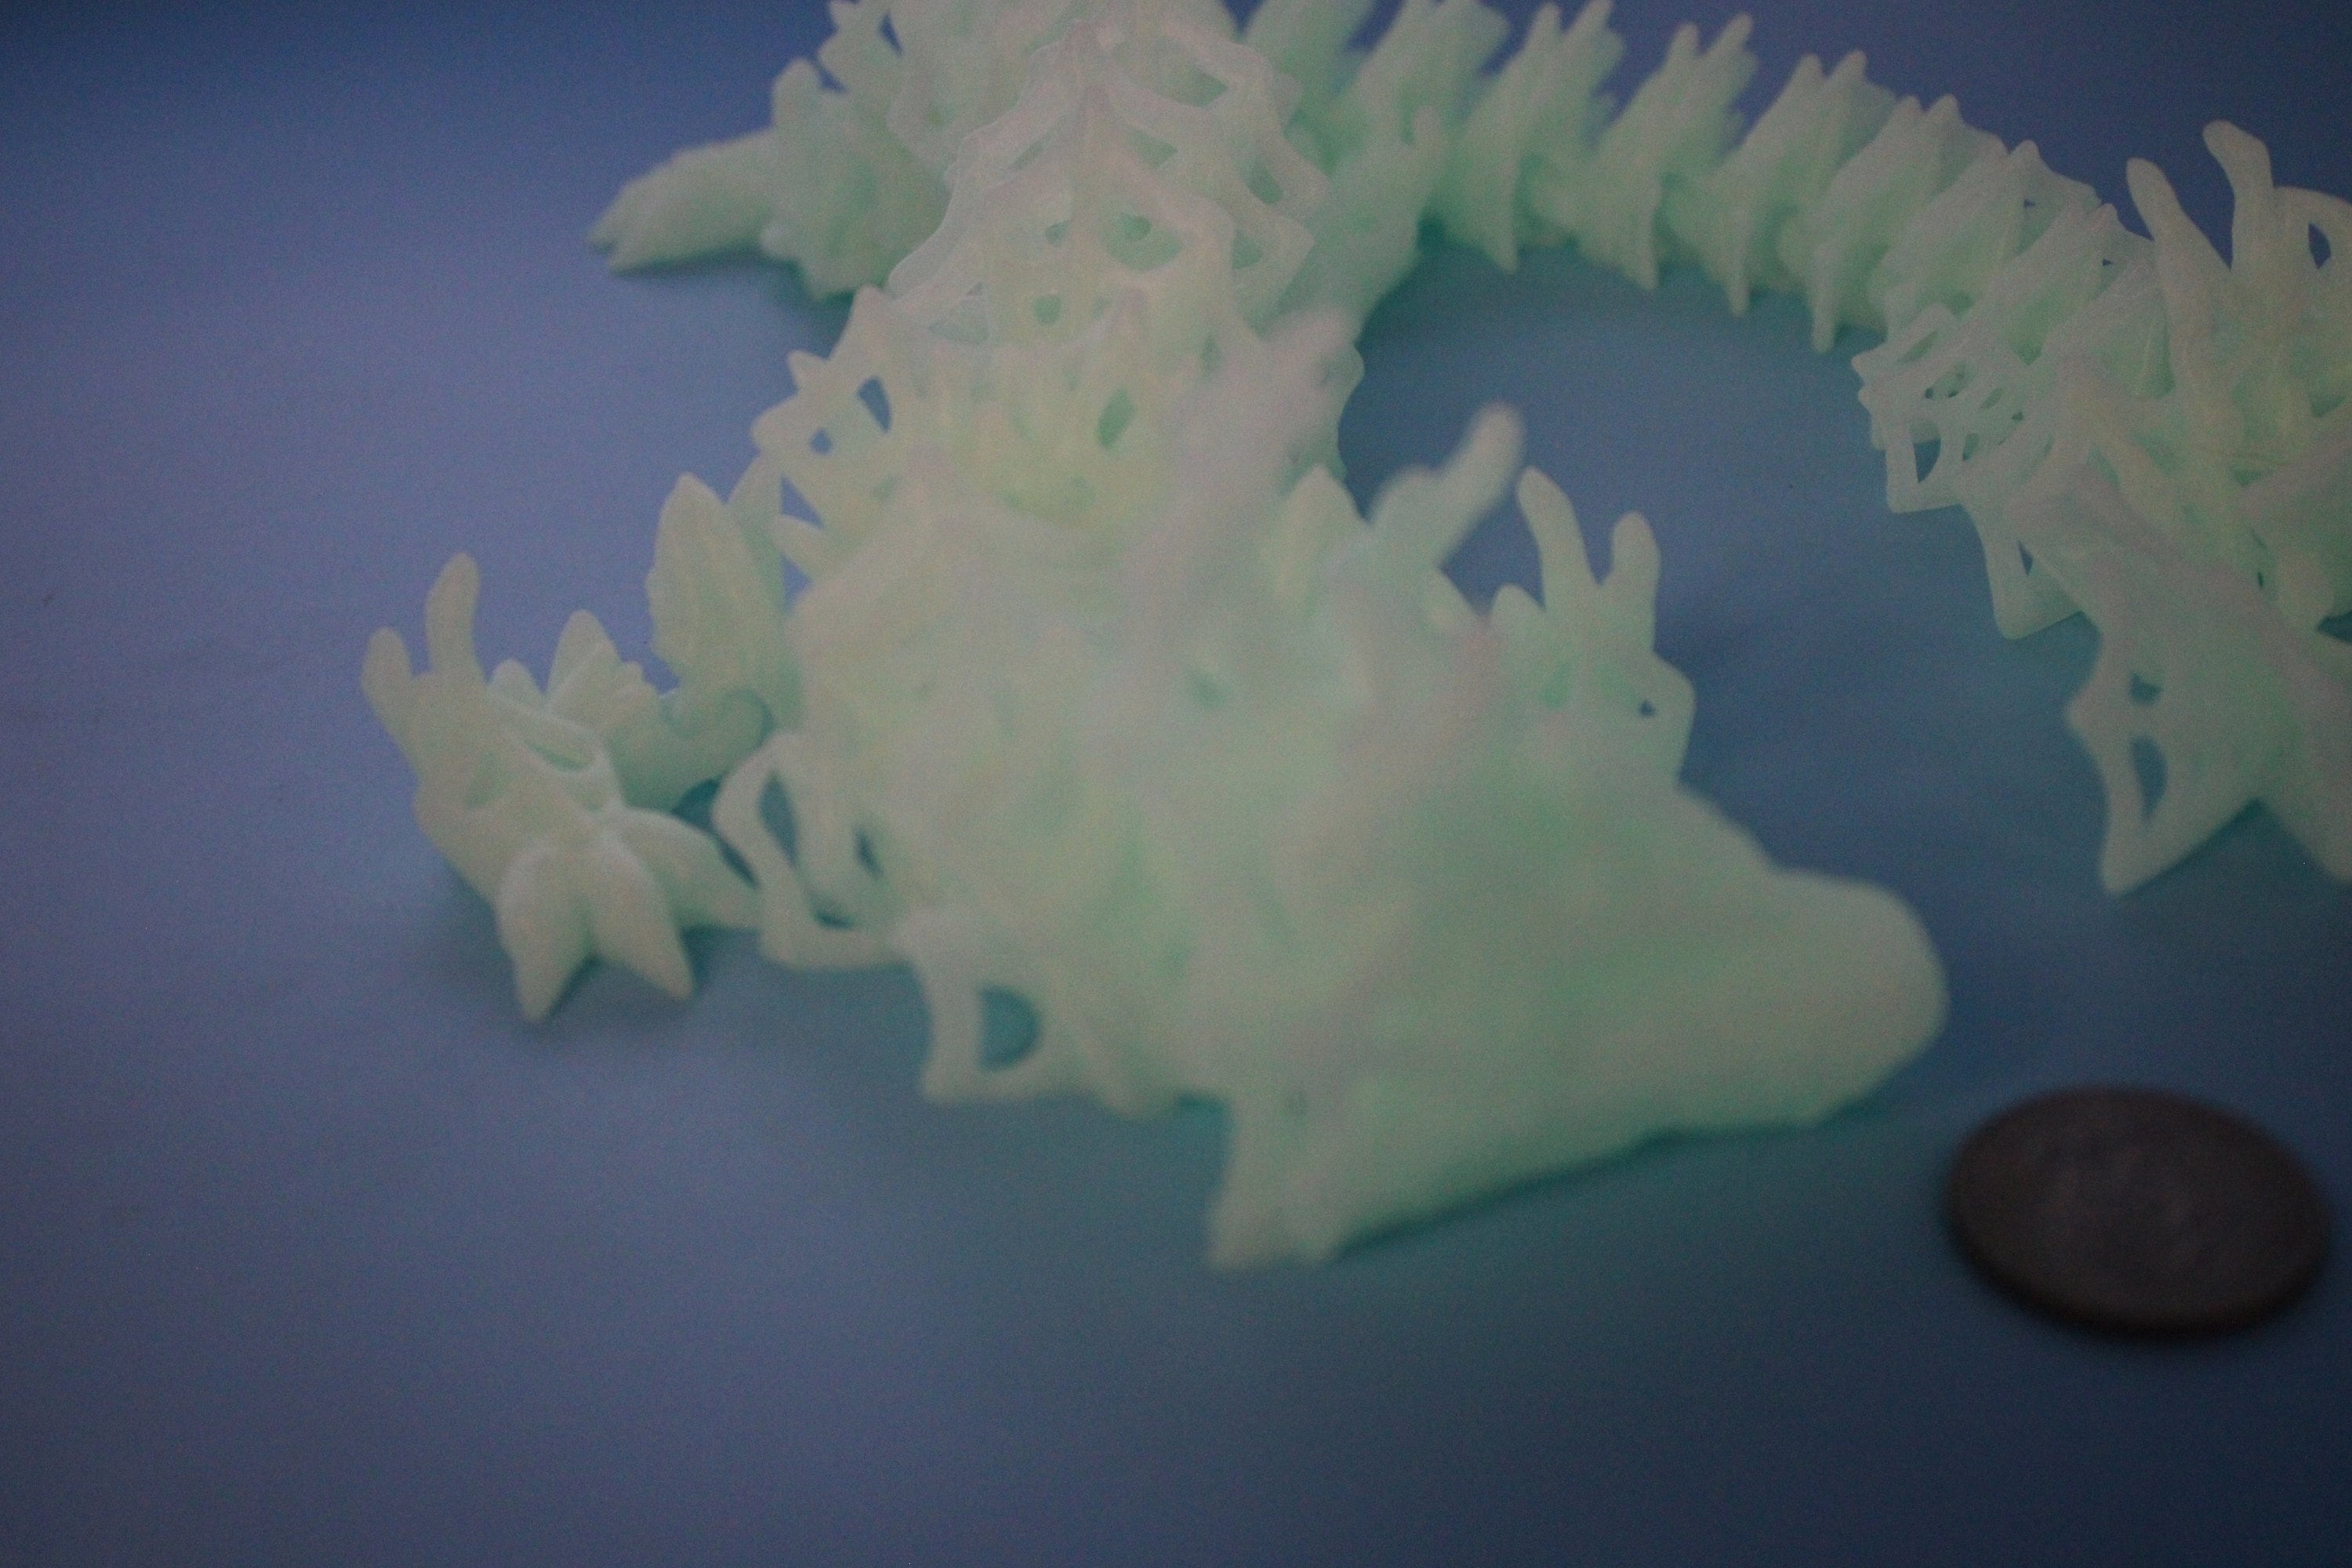 Wicked Dragon "Glow in the Dark" | 3D printed | Articulating Dragon | 19.5 in.